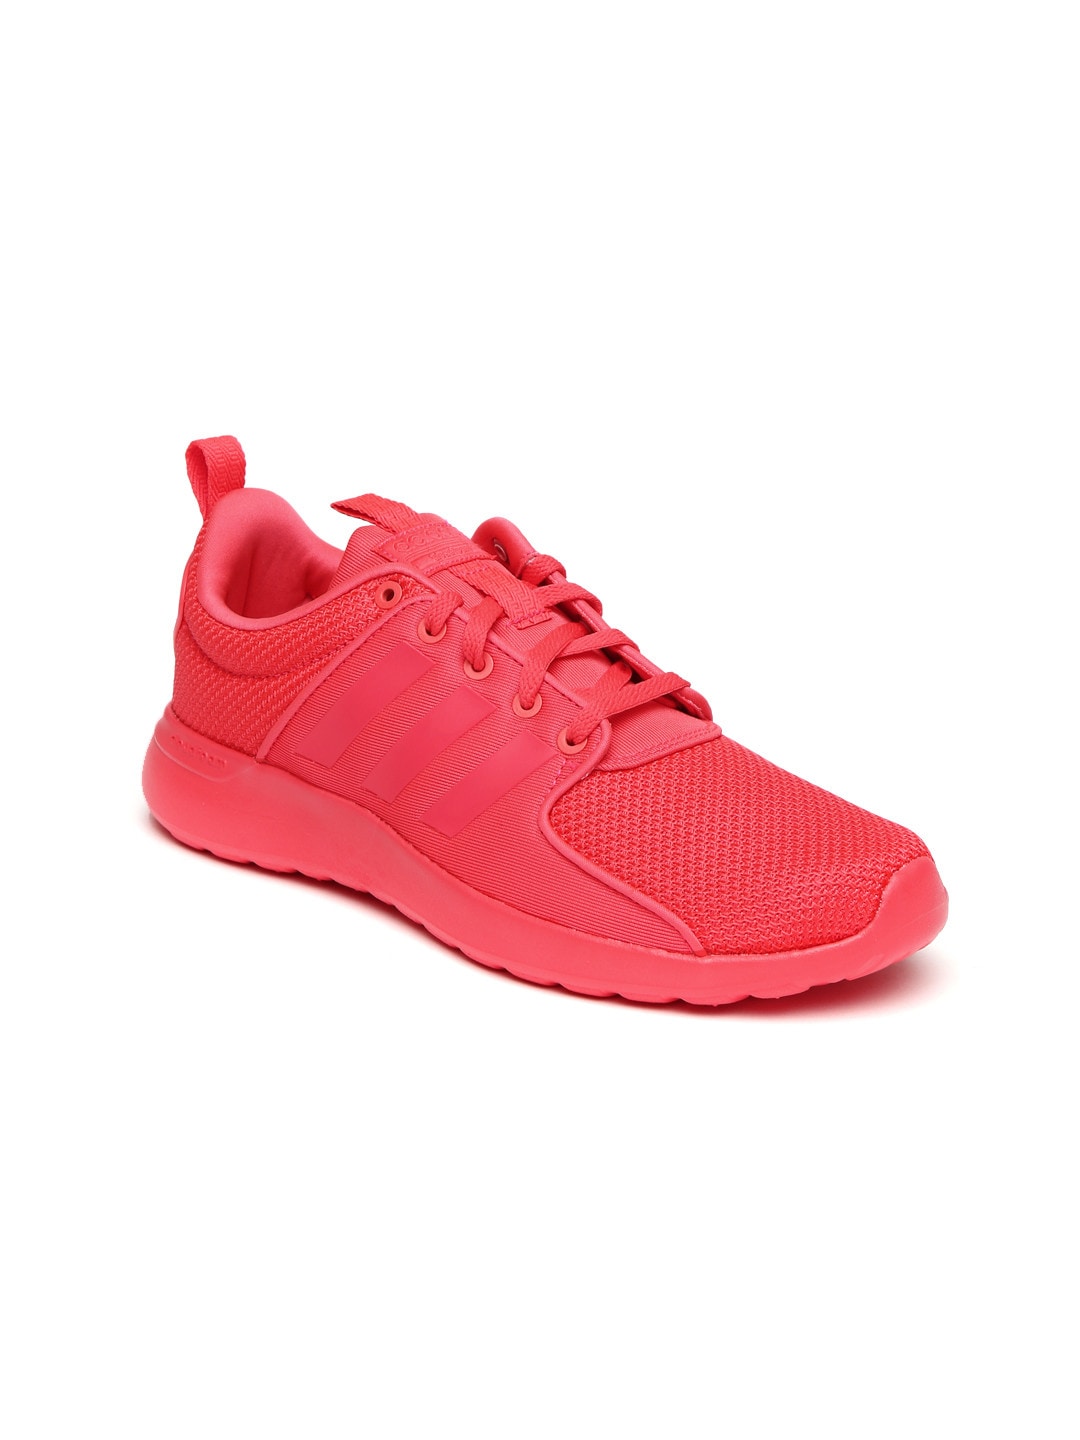 adidas neo cloudfoam footbed